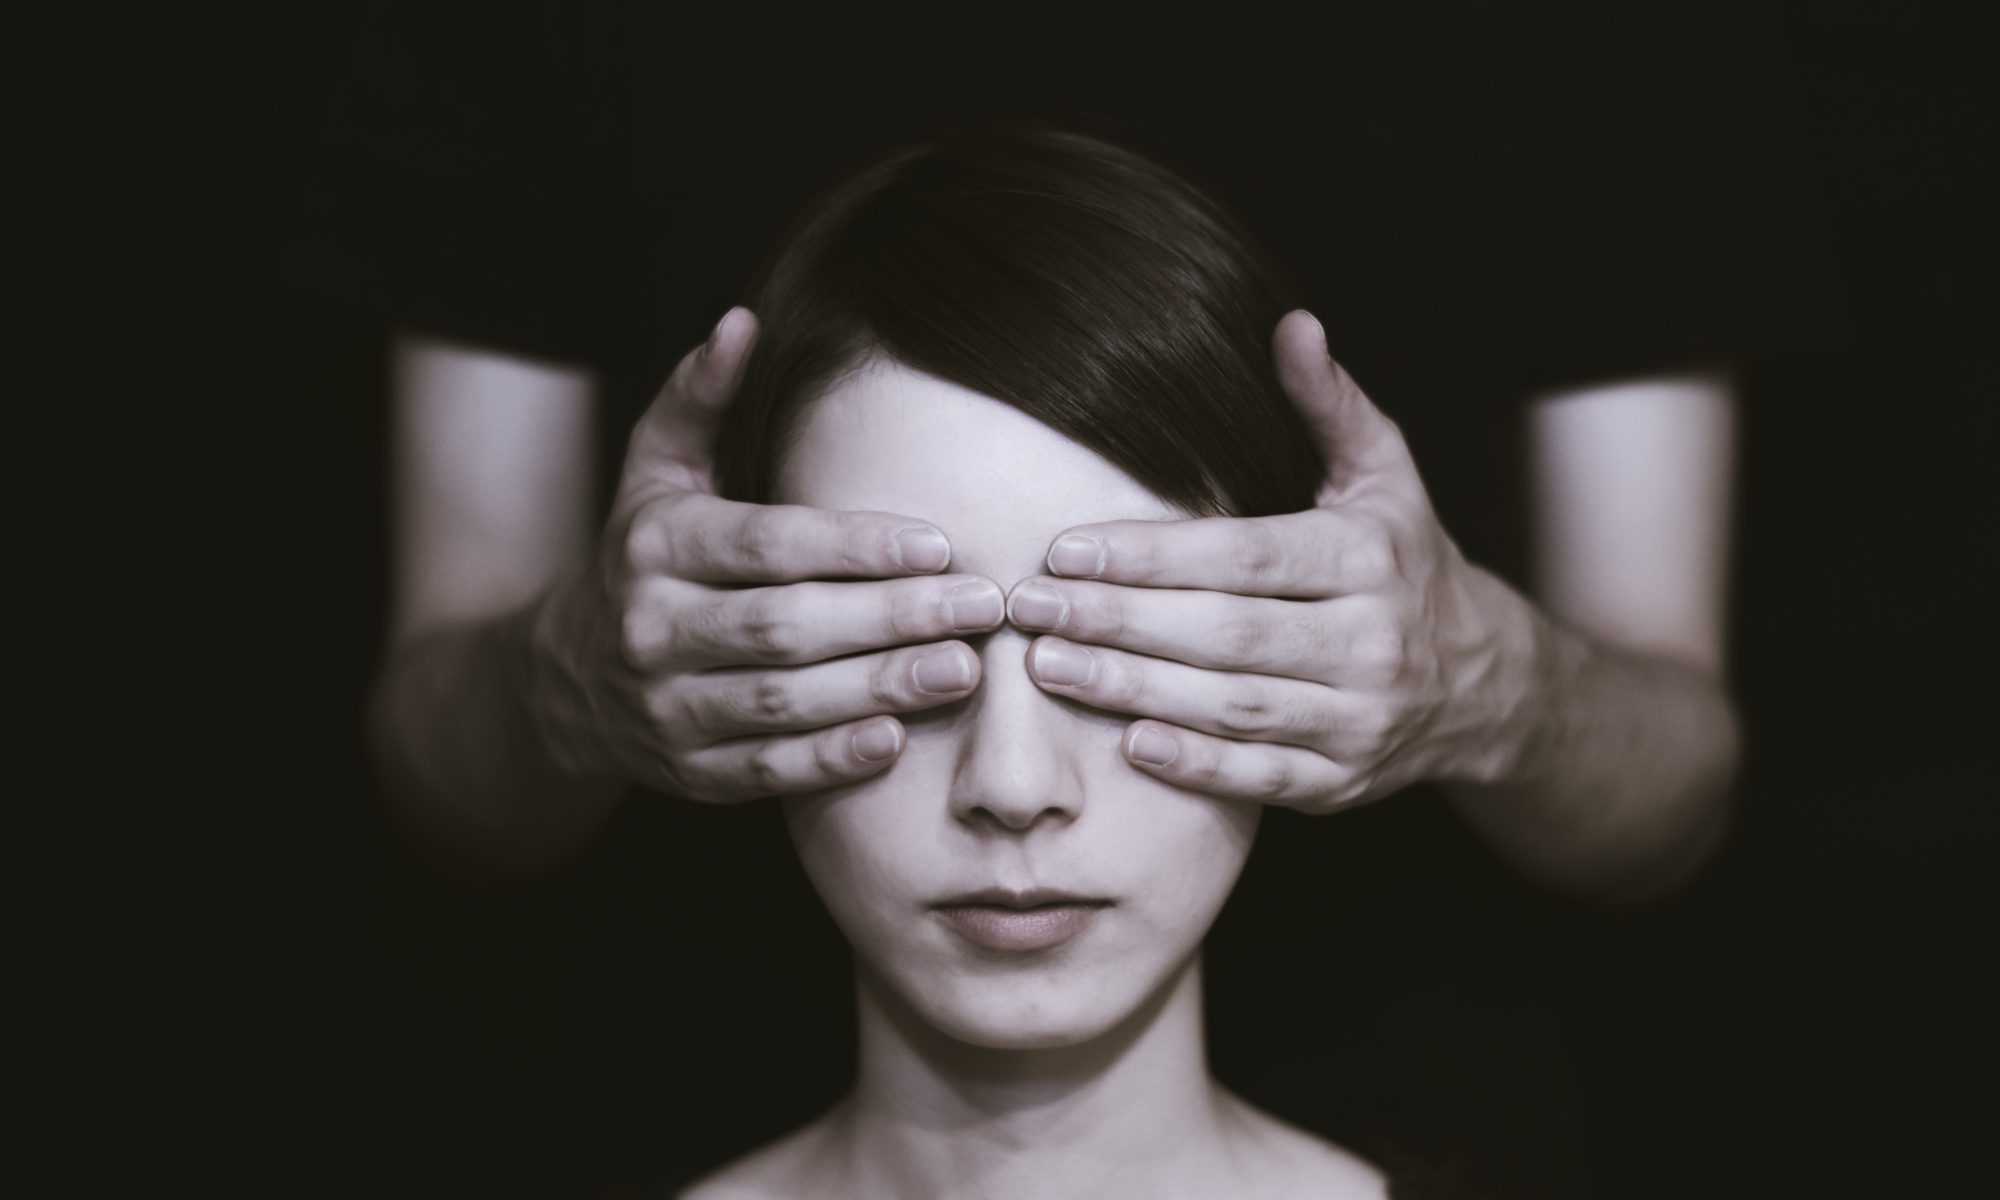 Woman with hands over her eyes